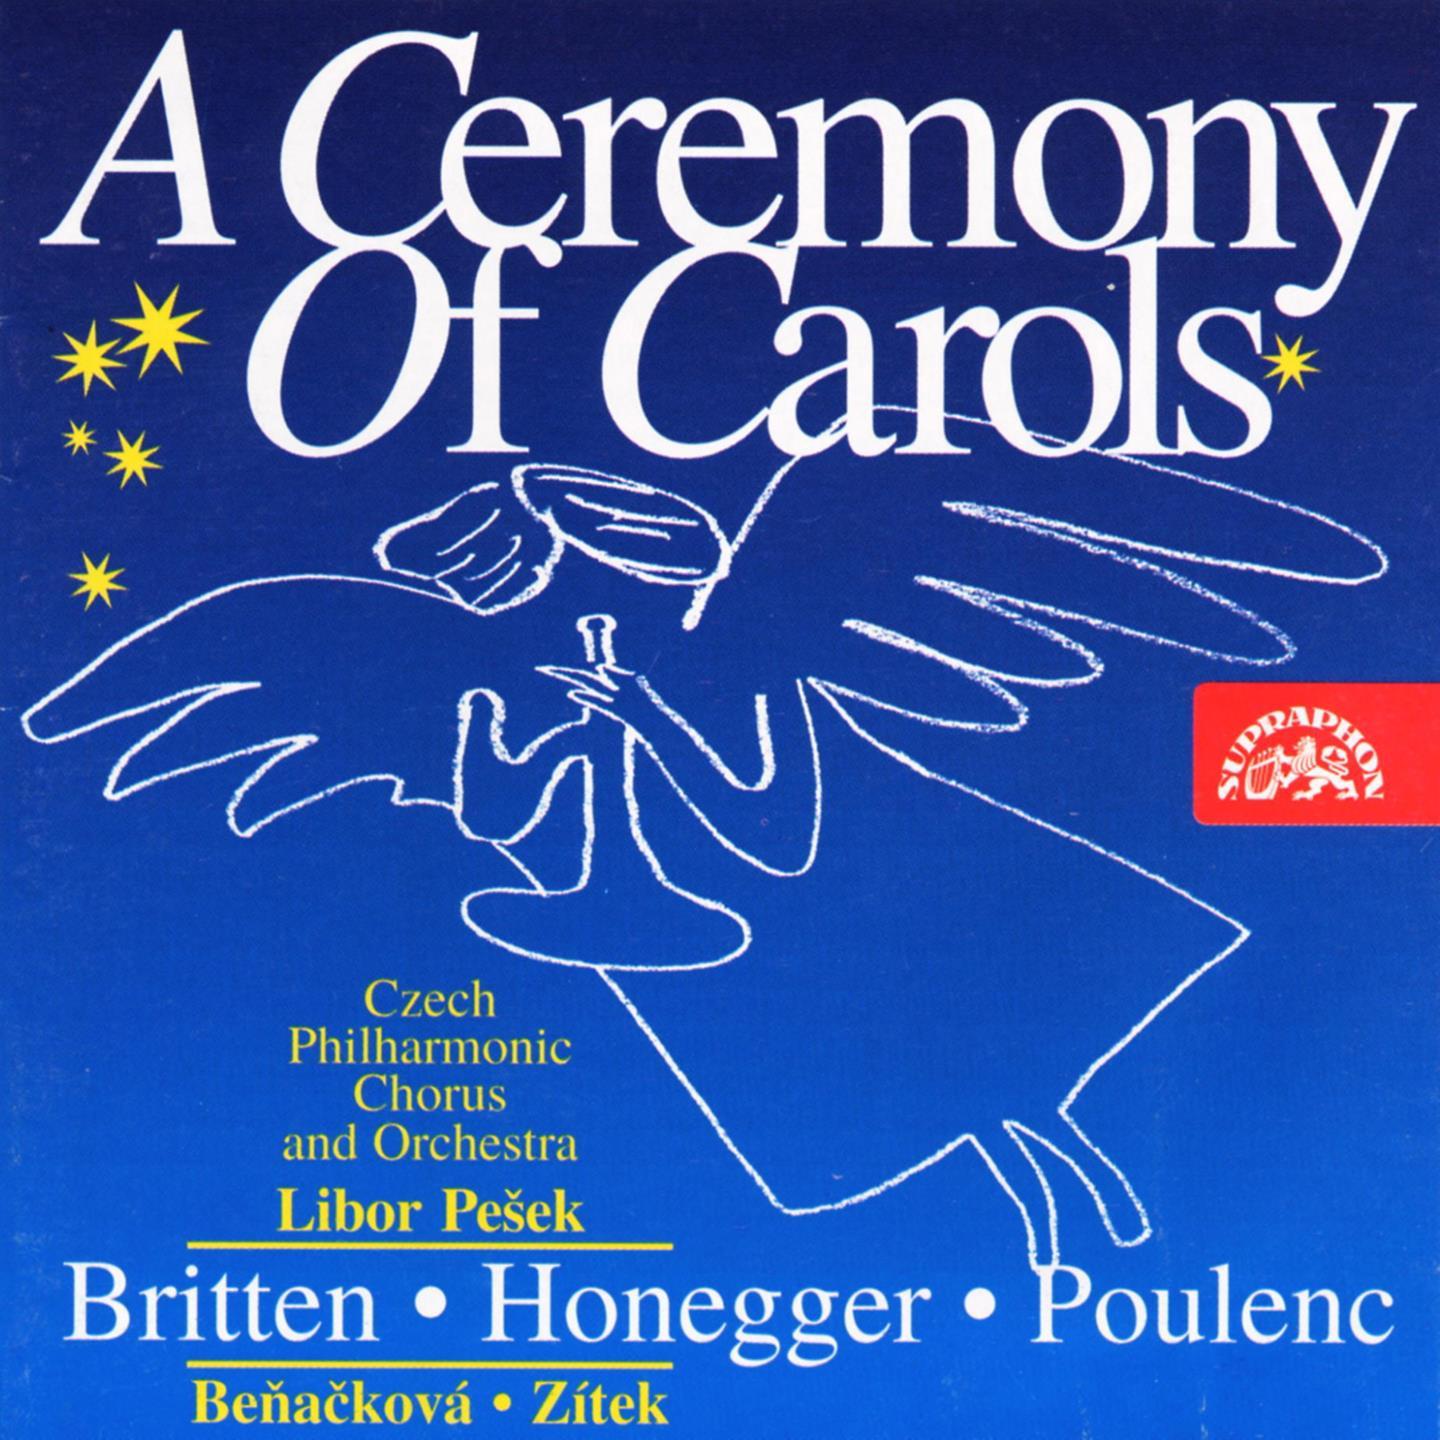 A Ceremony of Carols, Op. 28: III. There Is No Rose